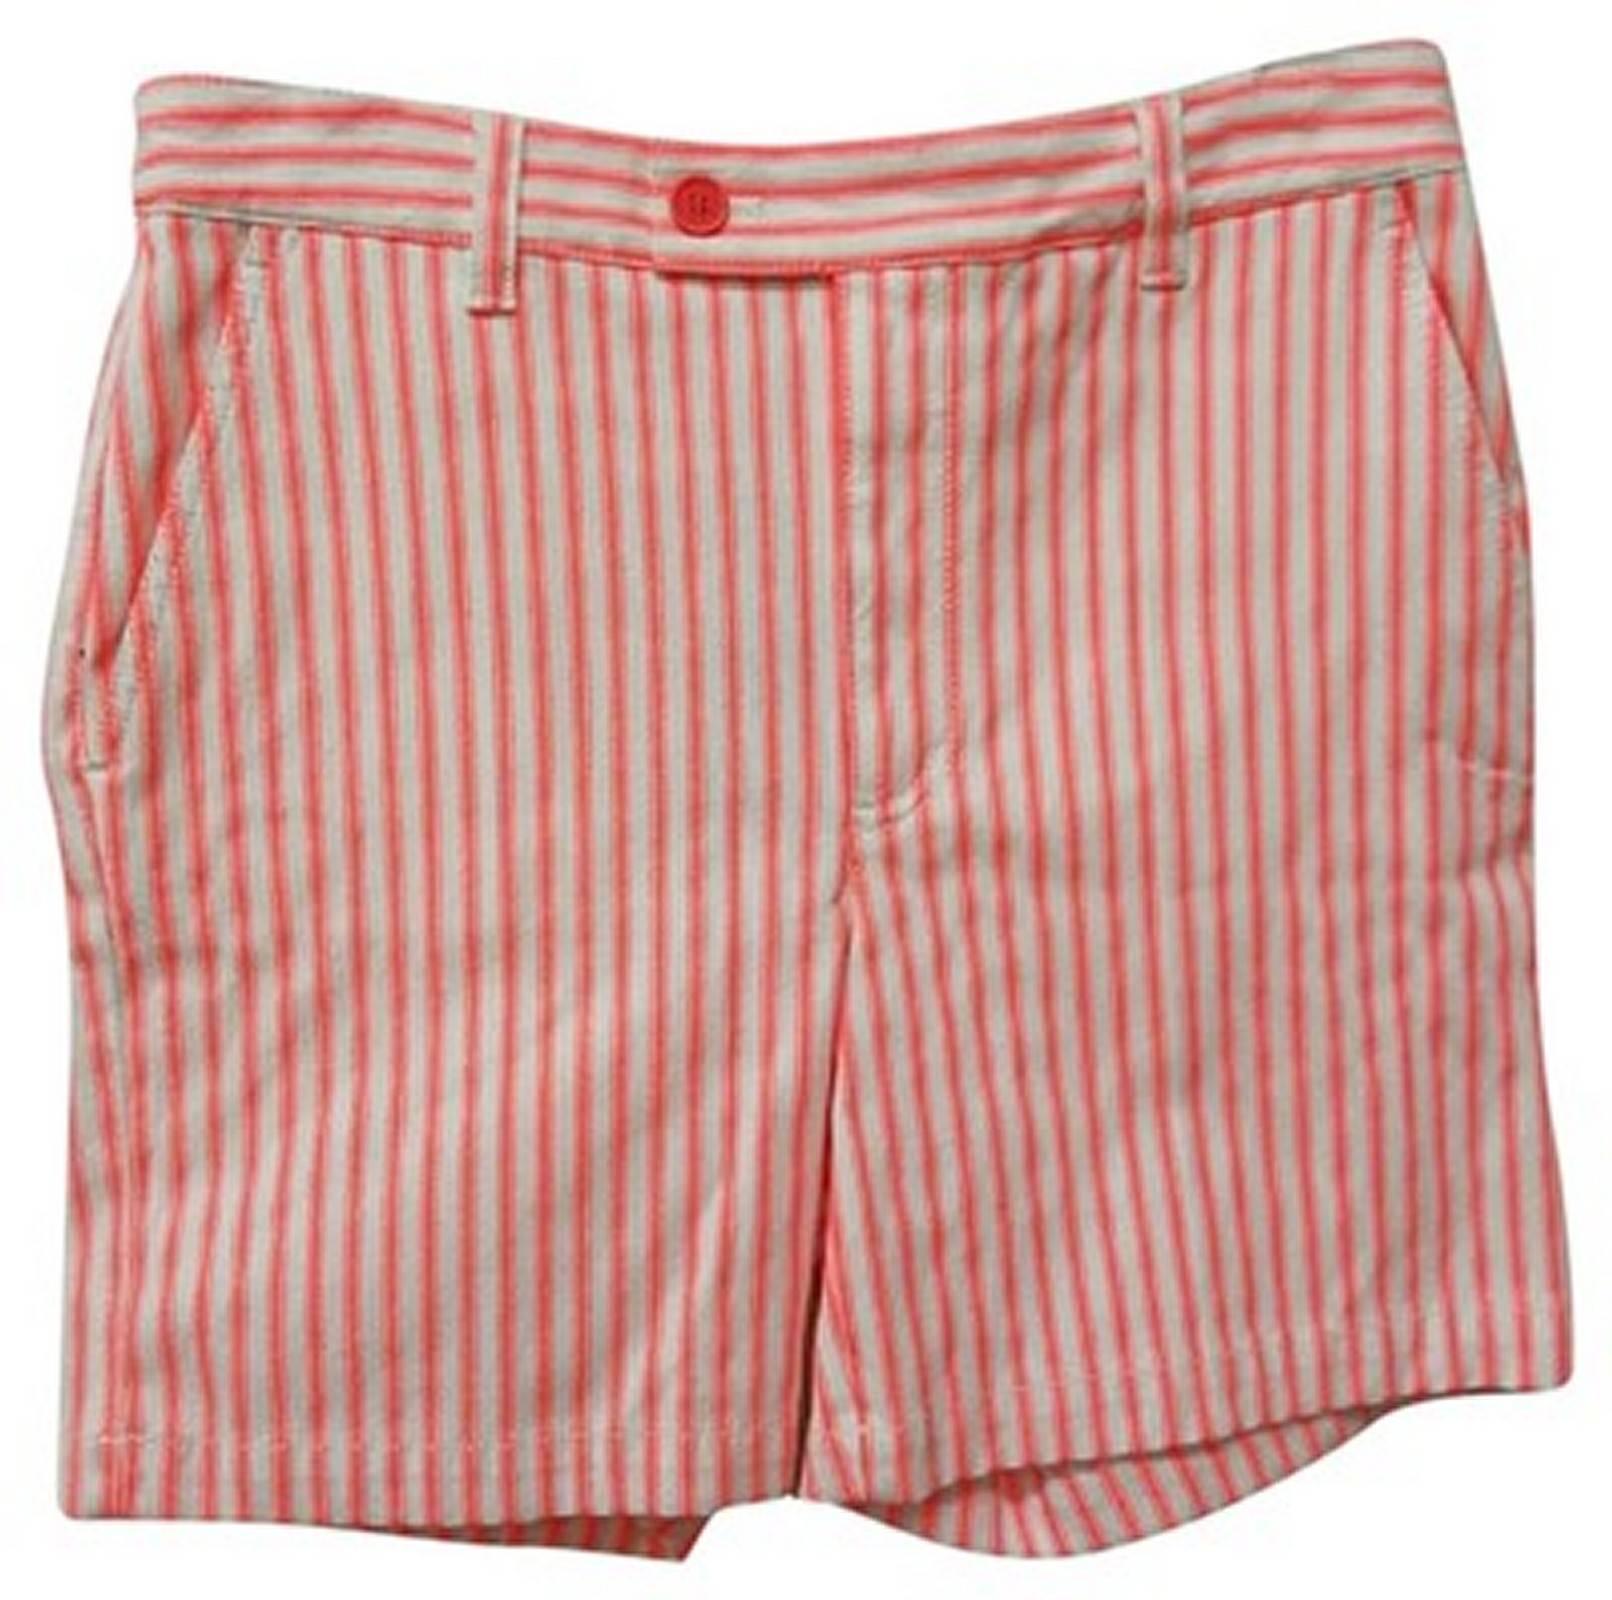 Marc by Marc Jacobs Striped Shorts - Size: 10 (M, 31) For Sale